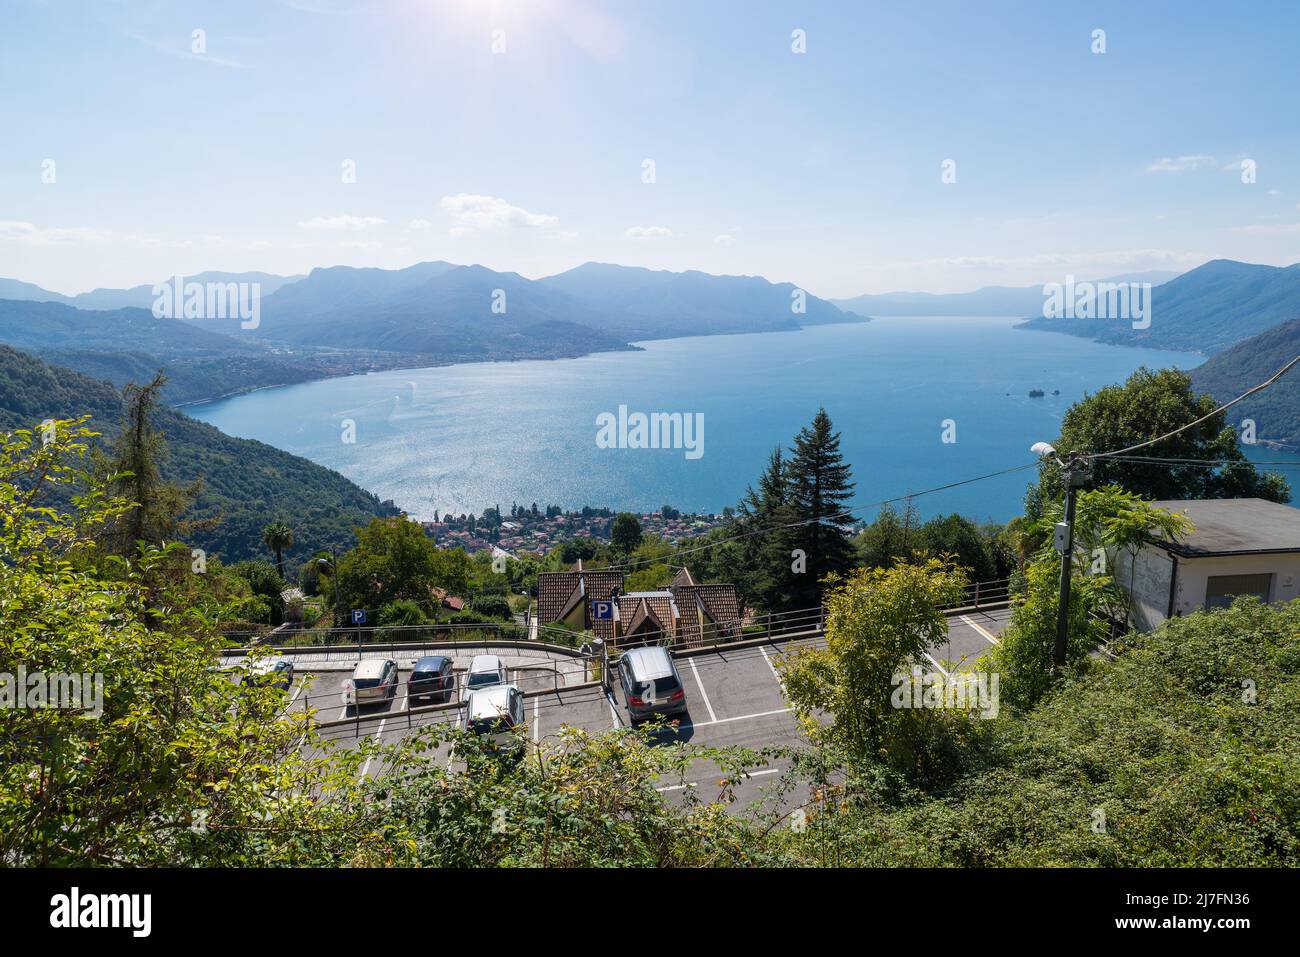 Big Italian lake. Lake Maggiore from Campagnano above Maccagno, visible below. Northern Italy, aerial view Stock Photo